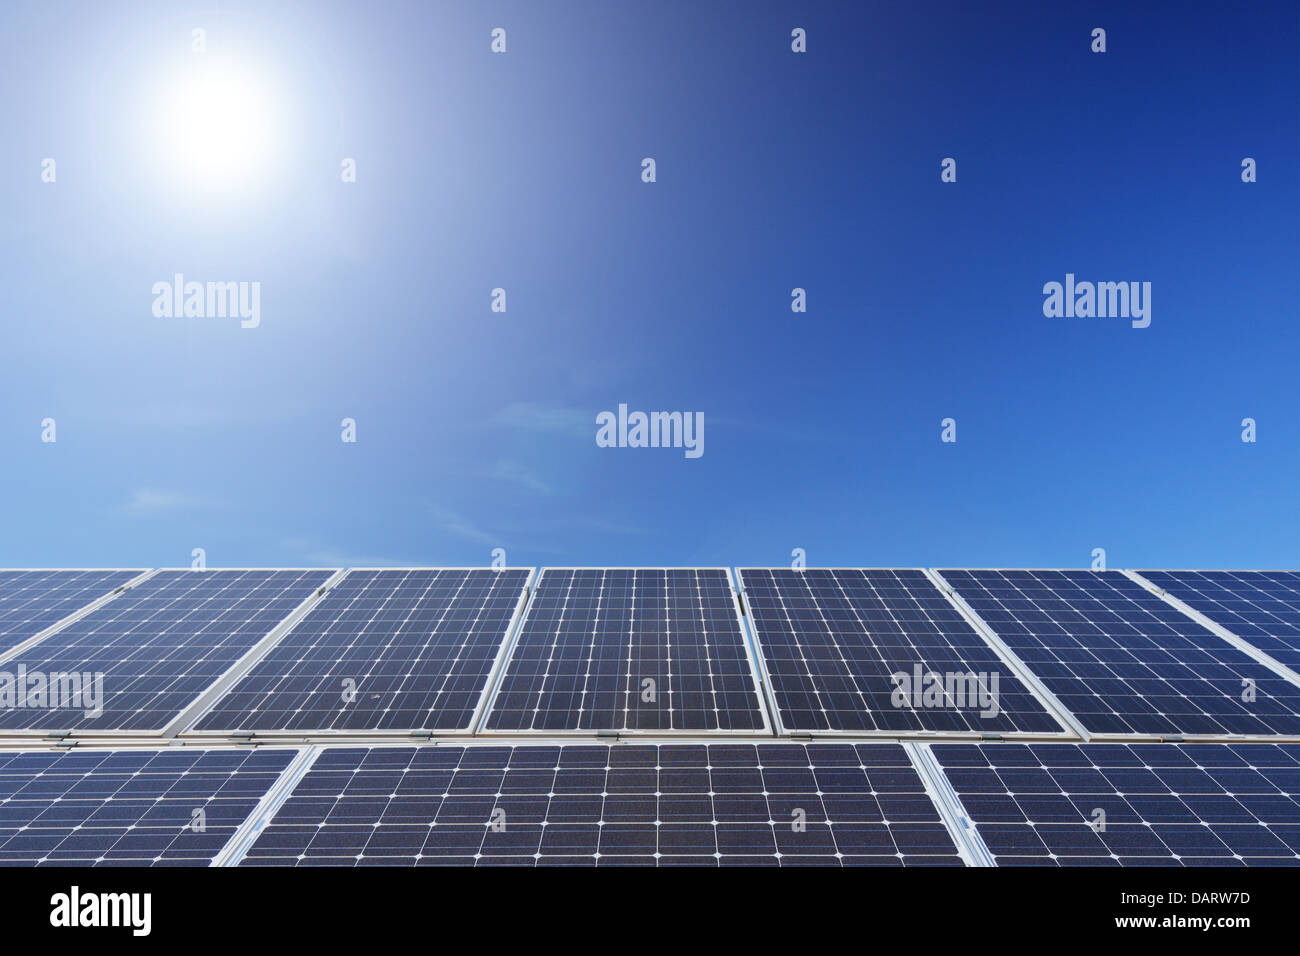 View of a solar photovoltaic cell panels Stock Photo